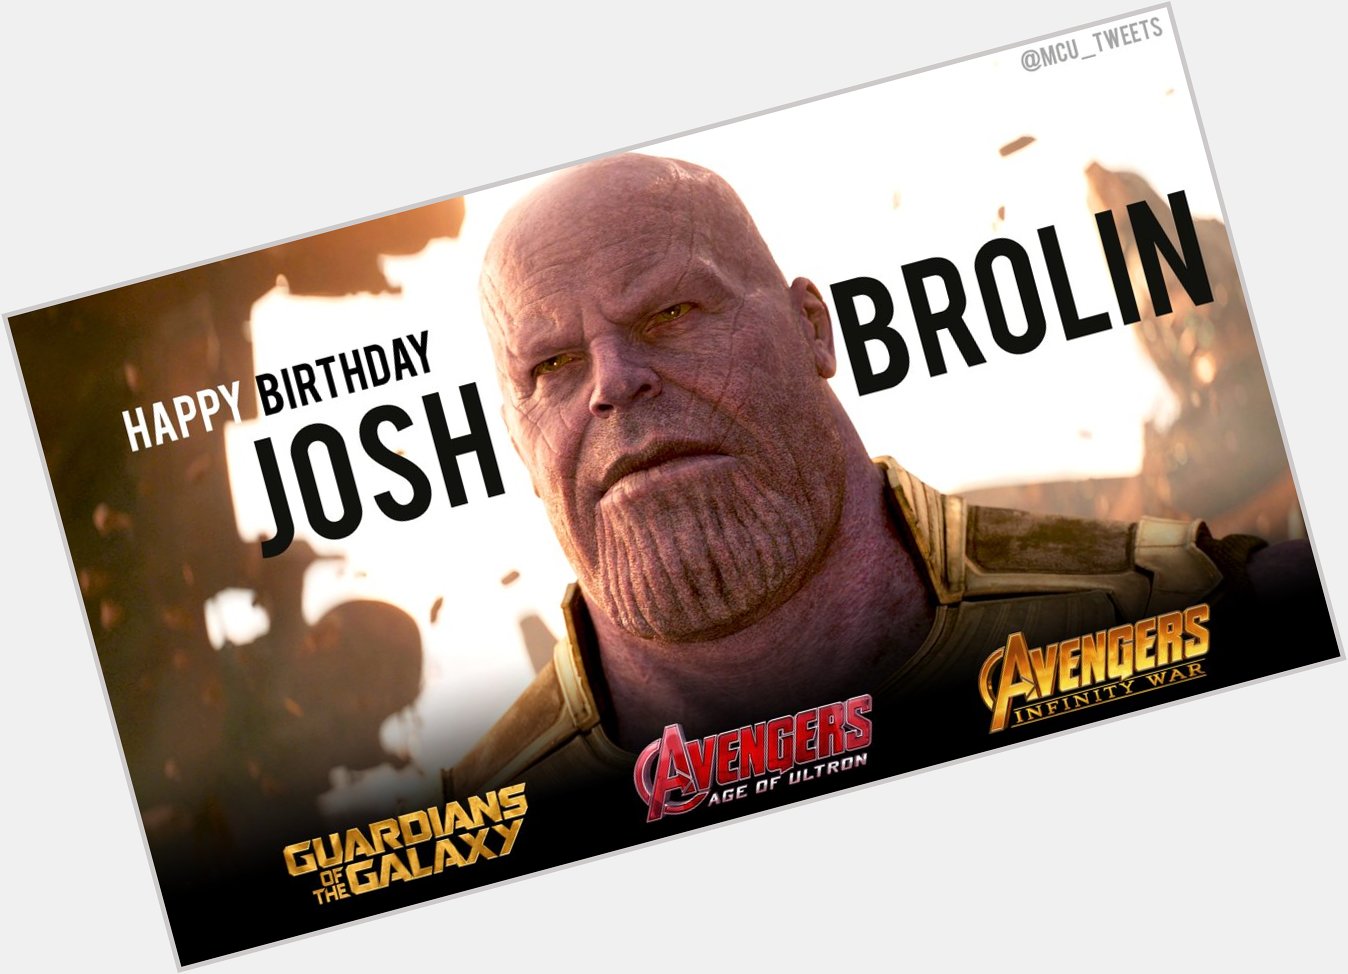 Wishing a very happy 50th birthday to the man who portrays Thanos in the MCU, actor Josh Brolin! 